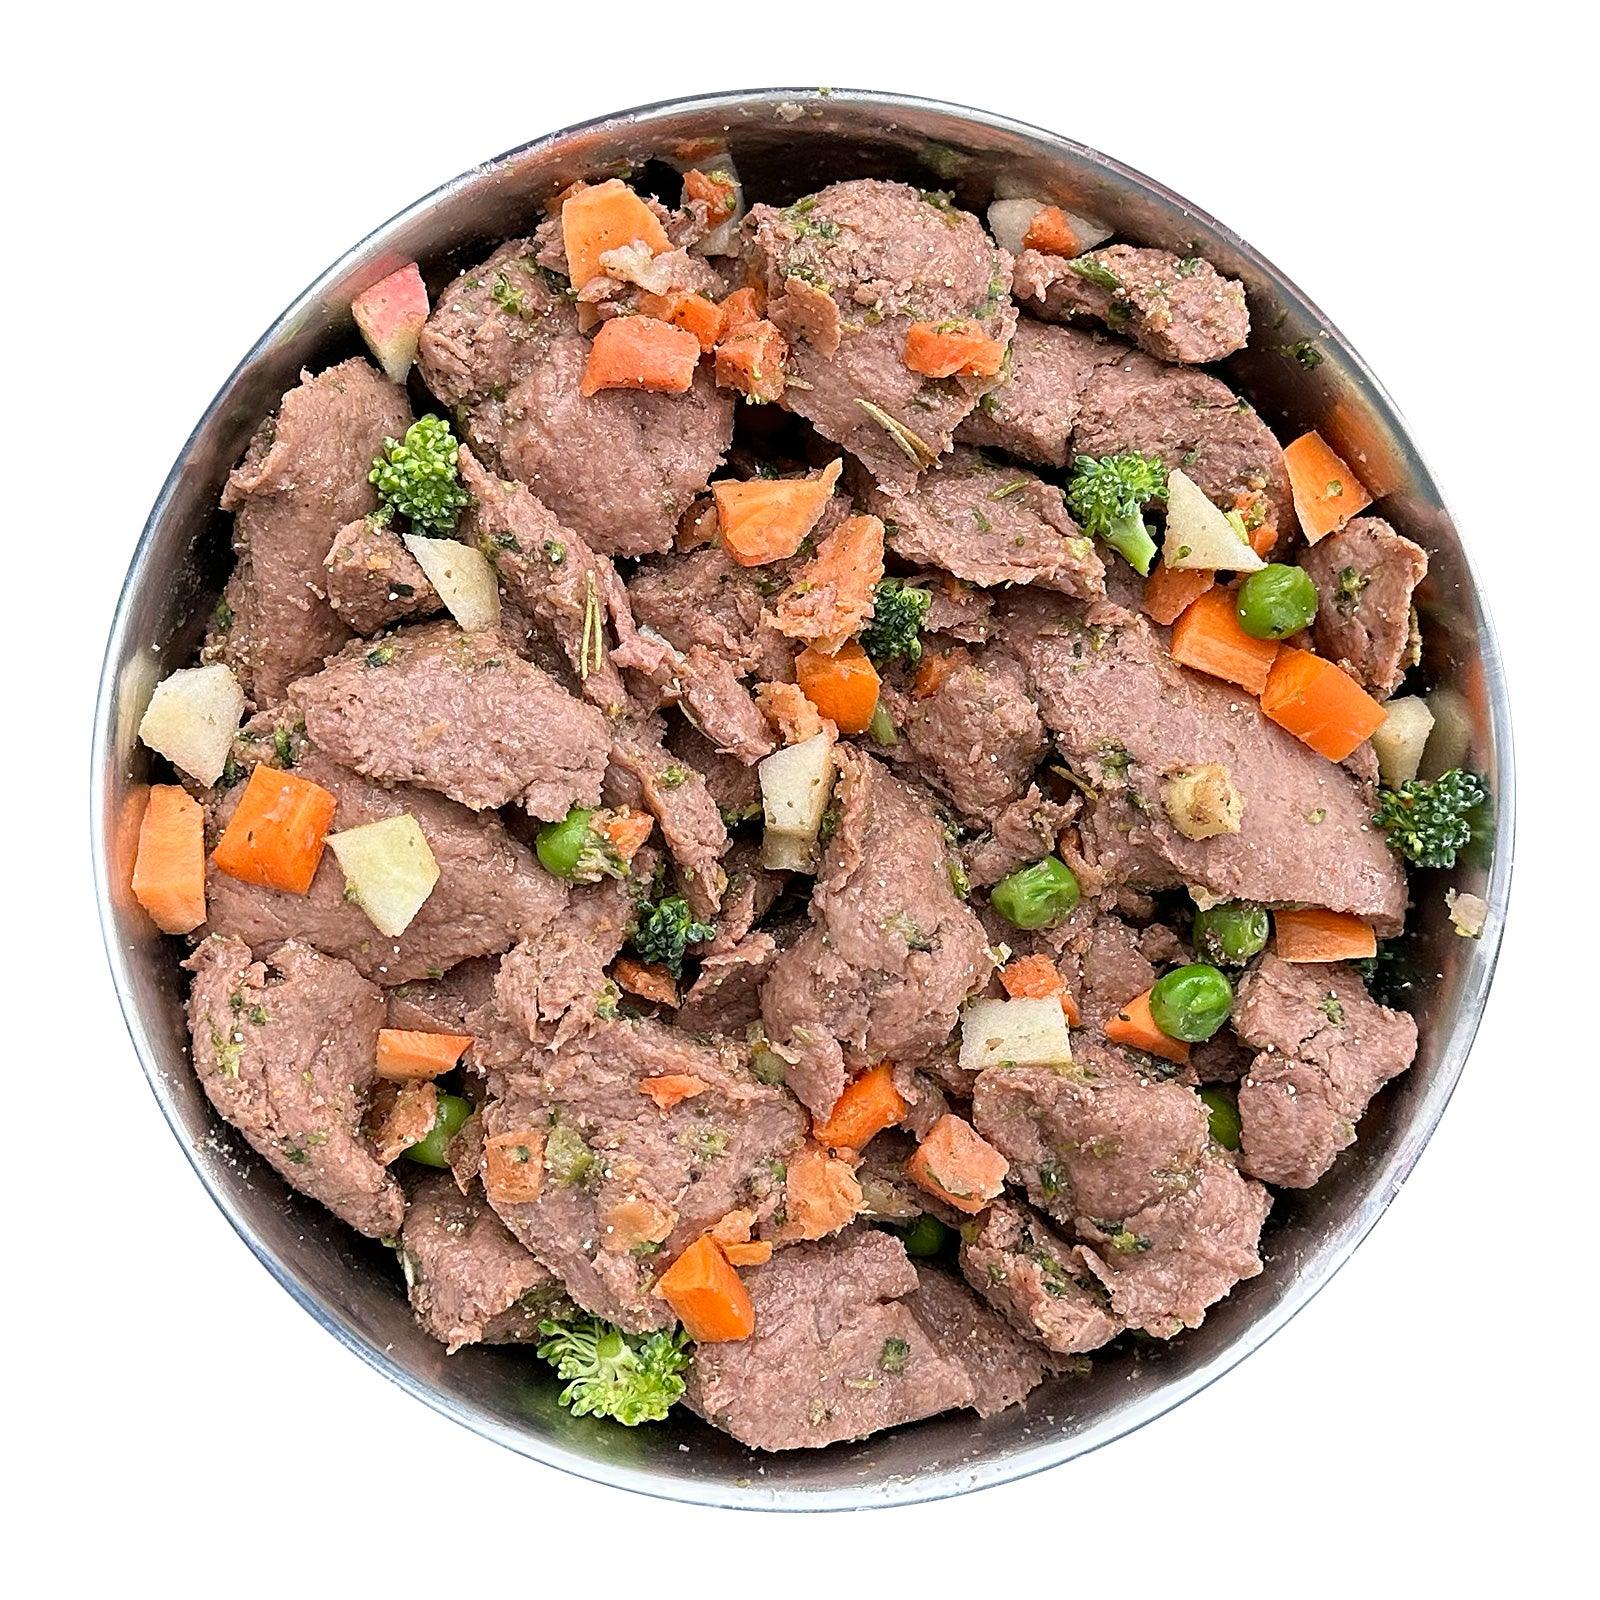 Cooked Fresh Beef Menu with Sweet potato, Apple and Broccoli (500g)